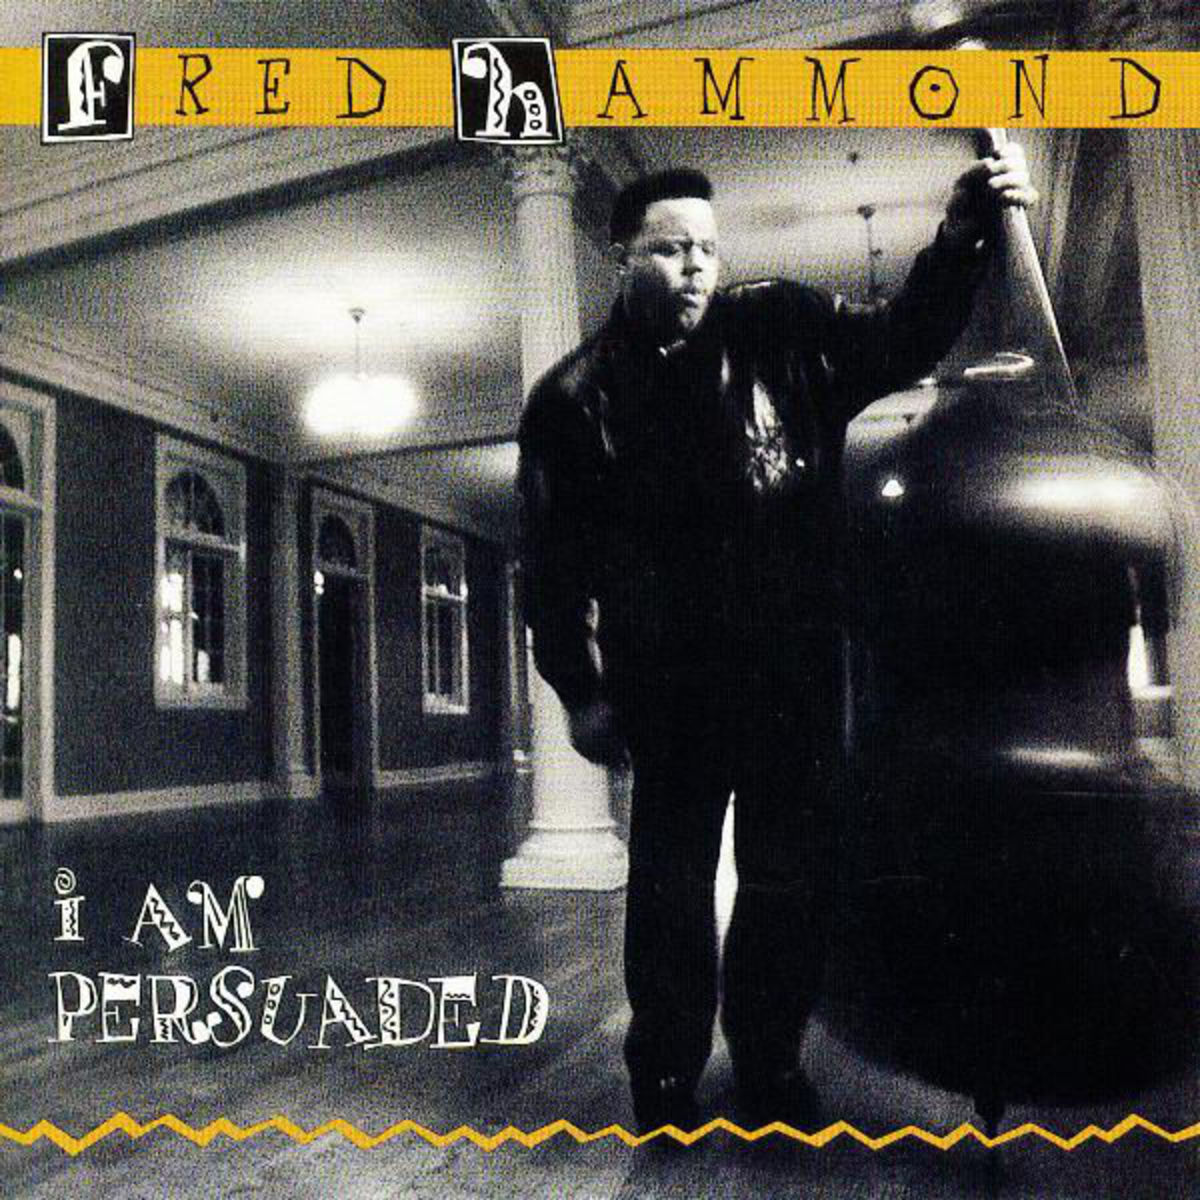 Fred Hammond didn't disappoint musically on his debut album.  Another example of a black and white picture grabbing one's attention.  Even if I wasn't a fan from his tenure with the Urban Gospel outfit known as Commissioned, I would have purchased.